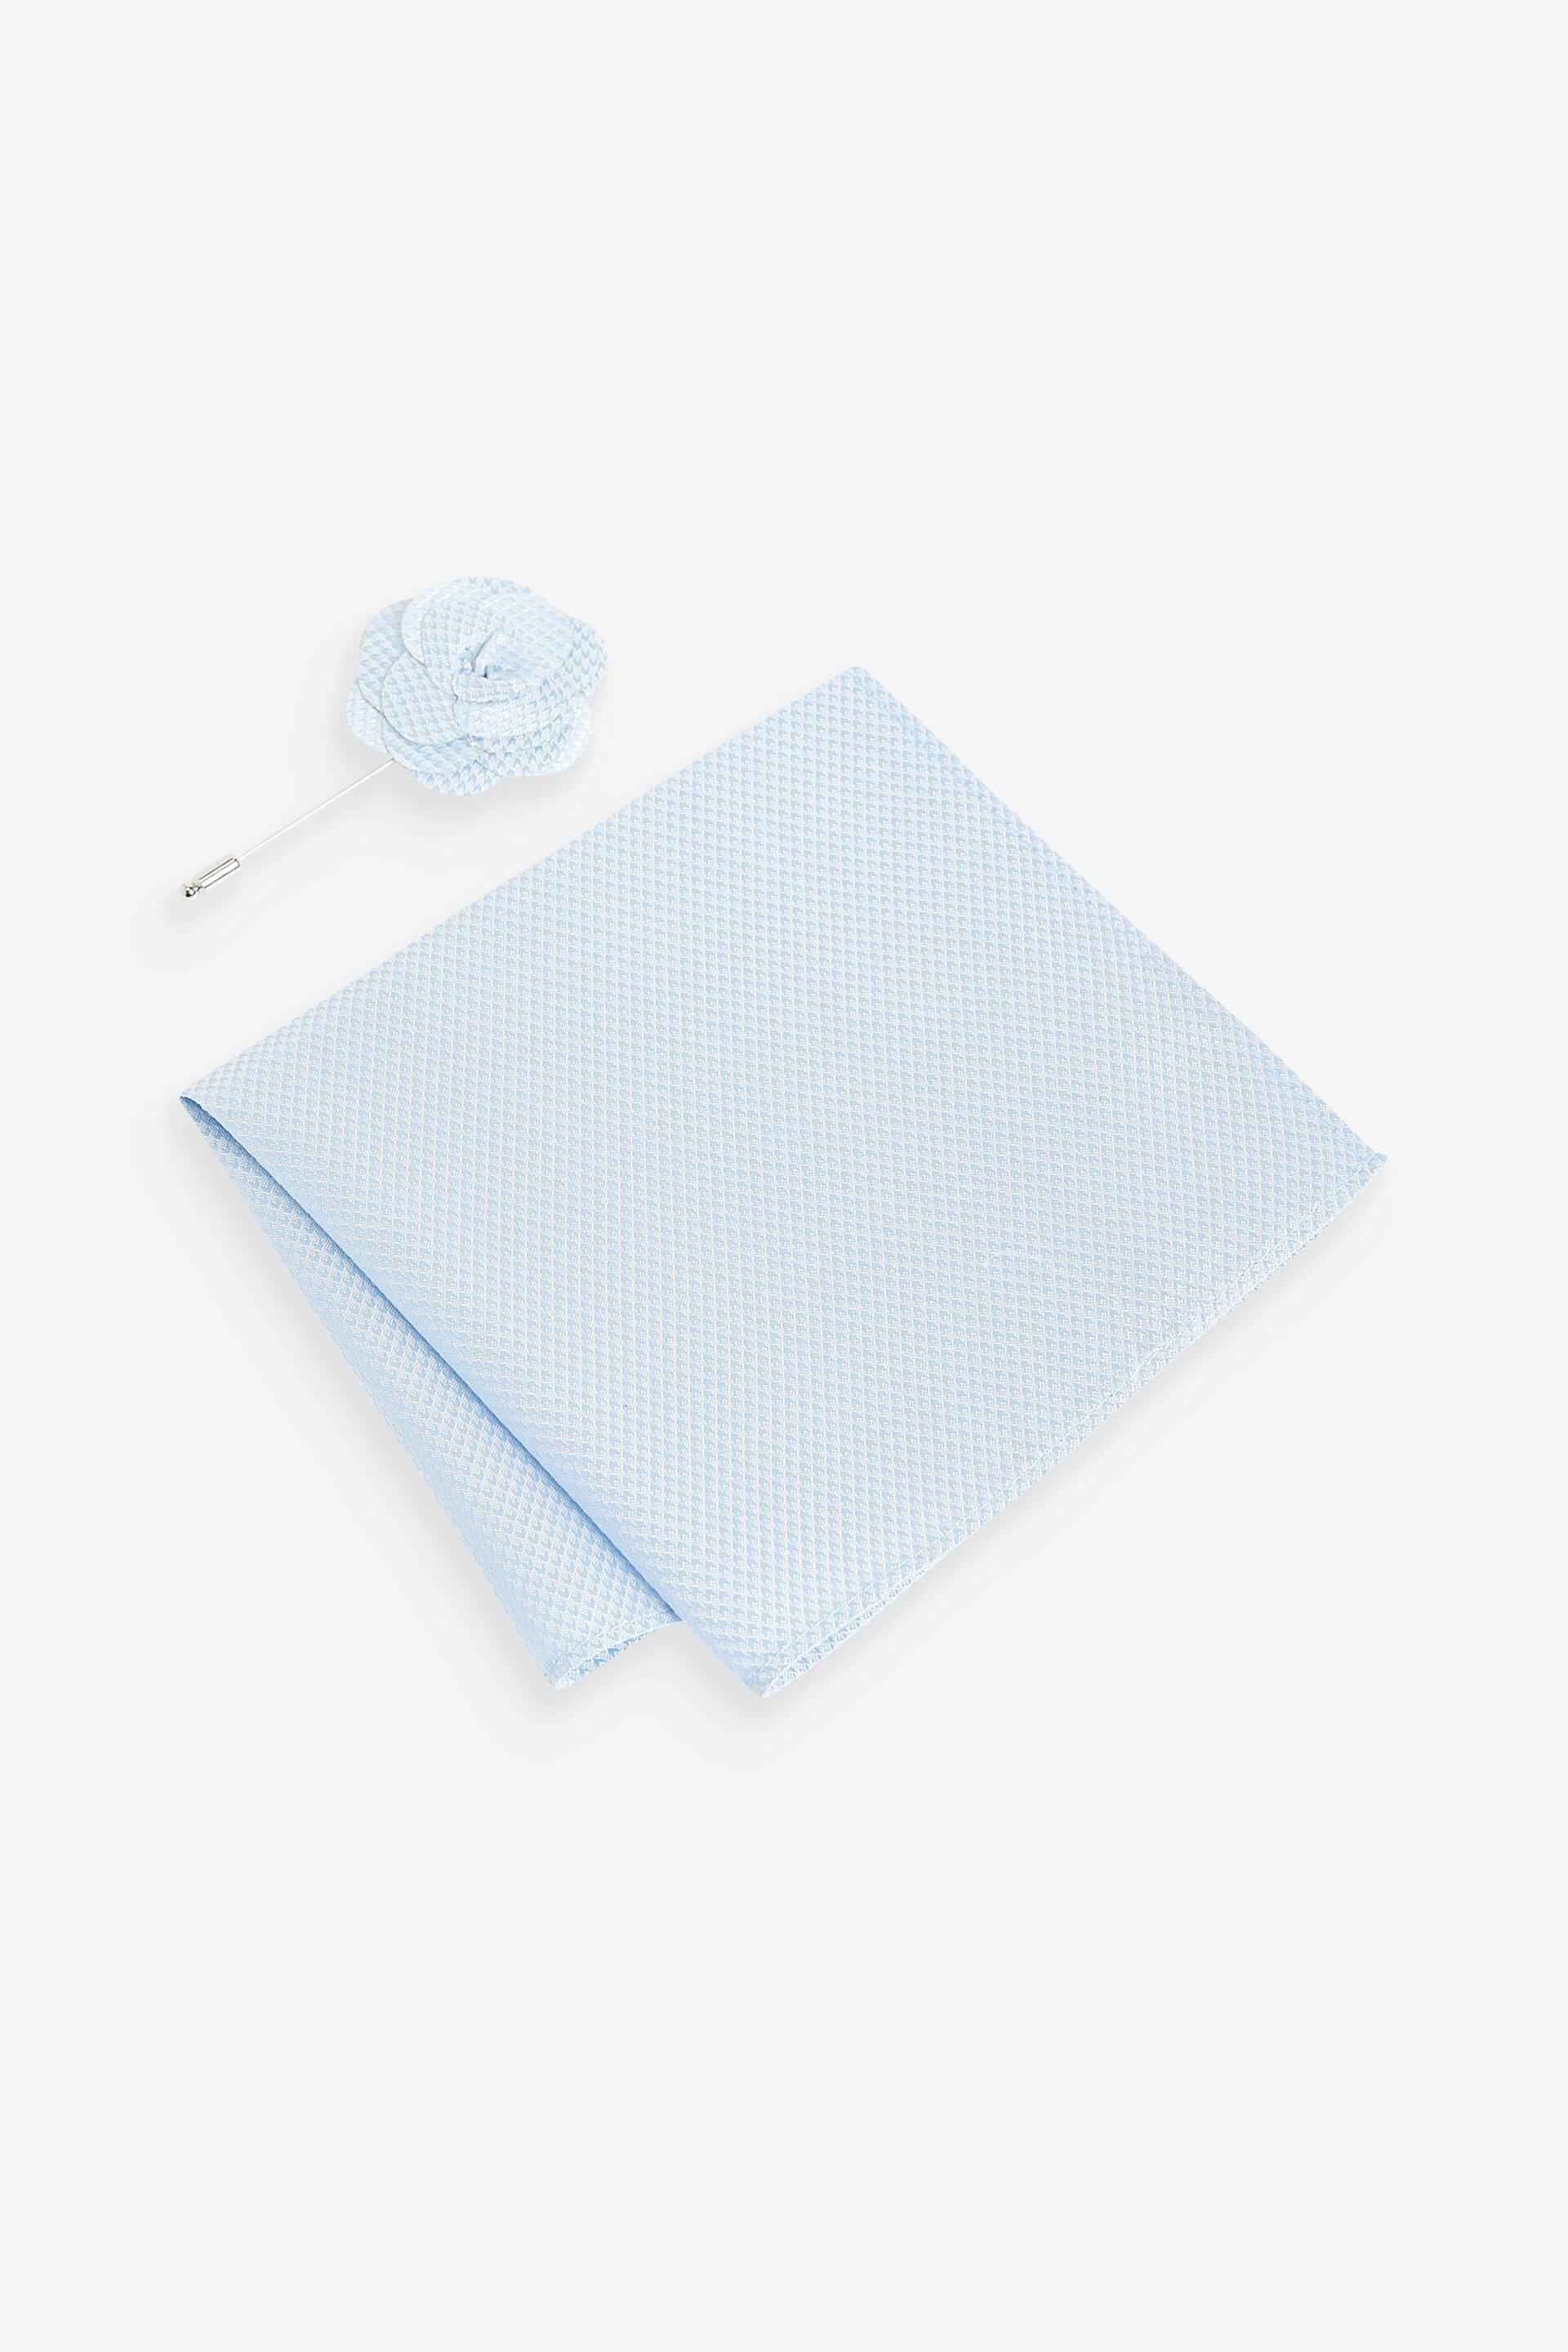 Light Blue Textured Silk Lapel Pin And Pocket Square Set - Image 1 of 2